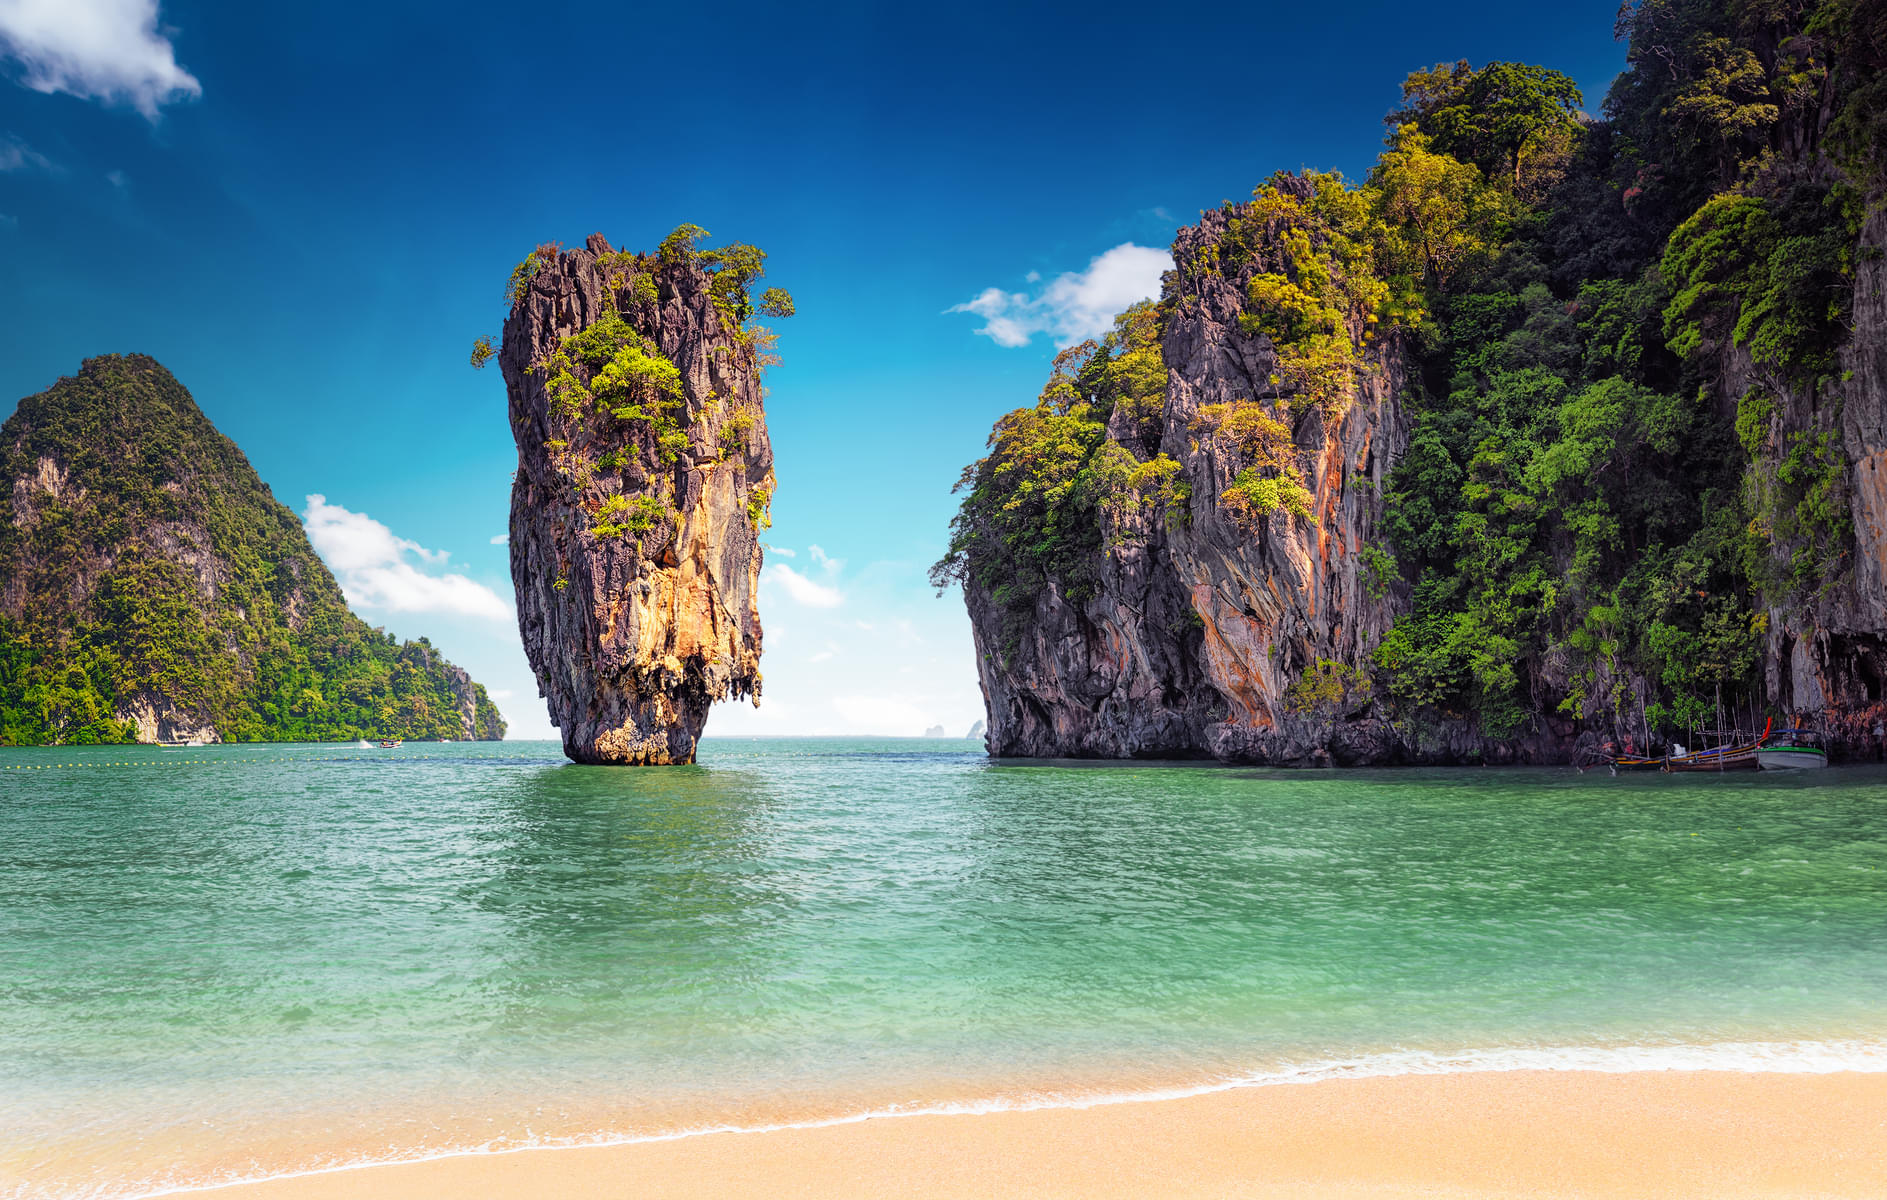 Welcome to the world of James Bond Island